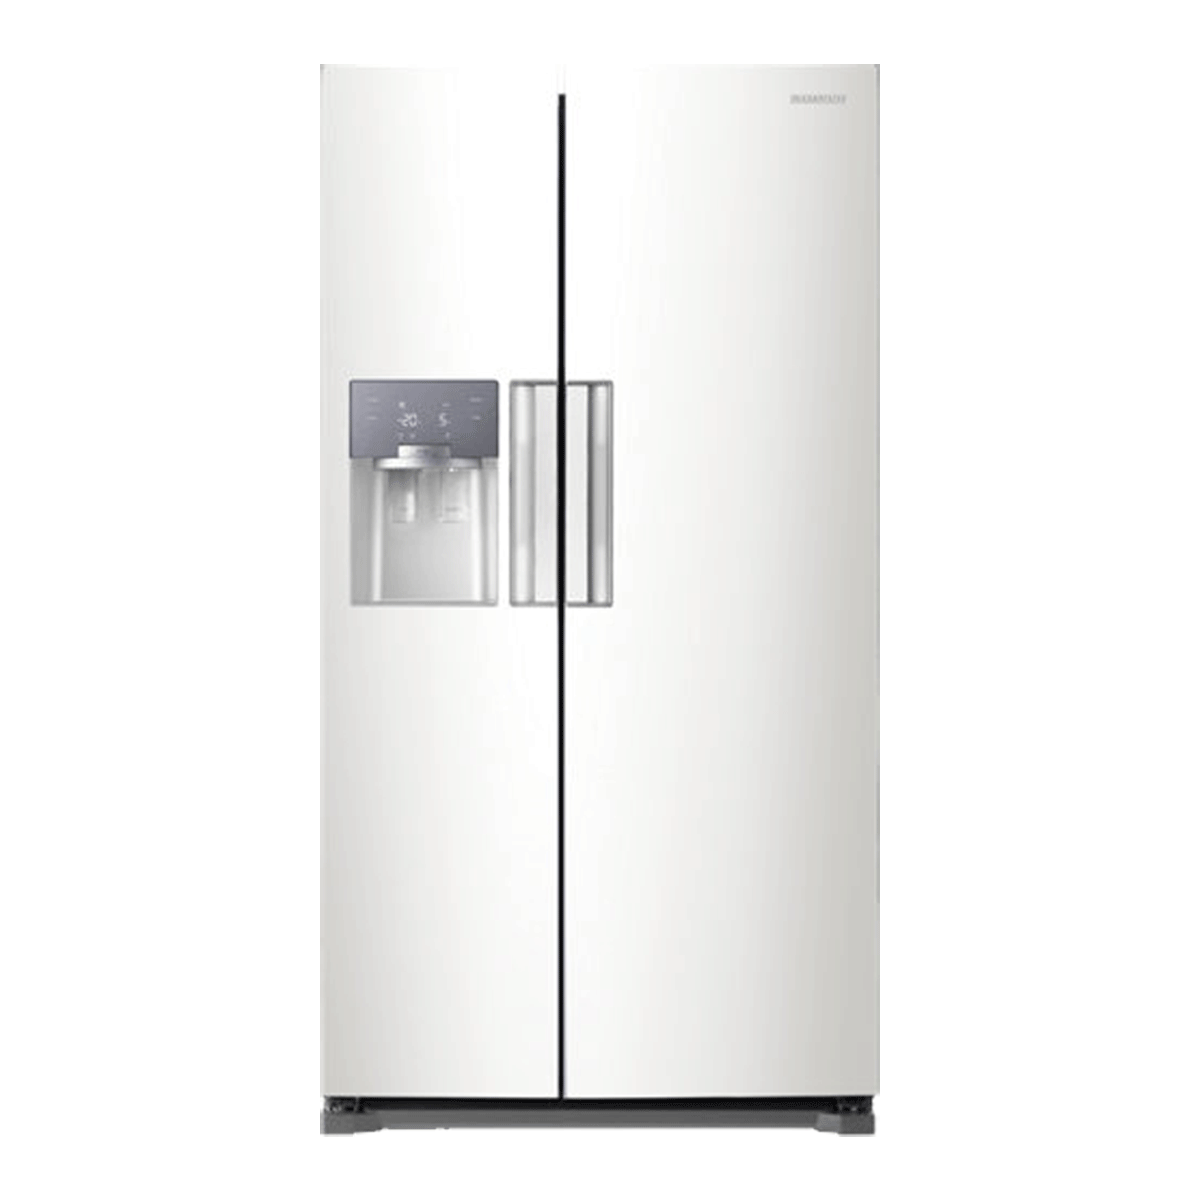 SAMSUNG RS52N3313WW, Side by Side Fridge Freezer White in white with A+ Energy Rating. Non